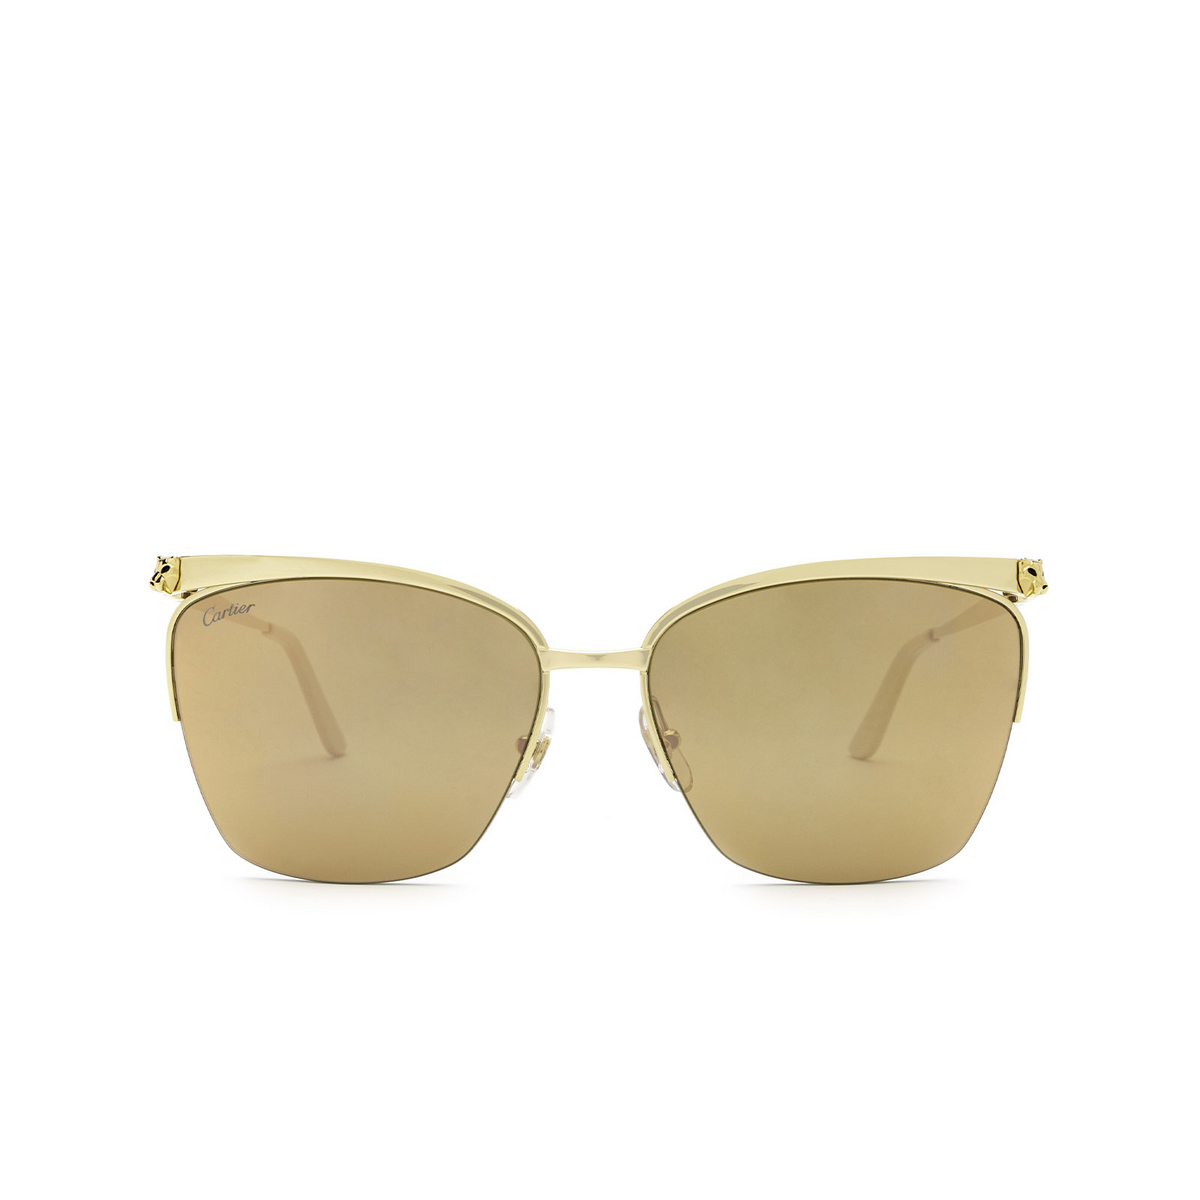 Cartier® Cat-eye Sunglasses: CT0124S color Gold 002 - front view.